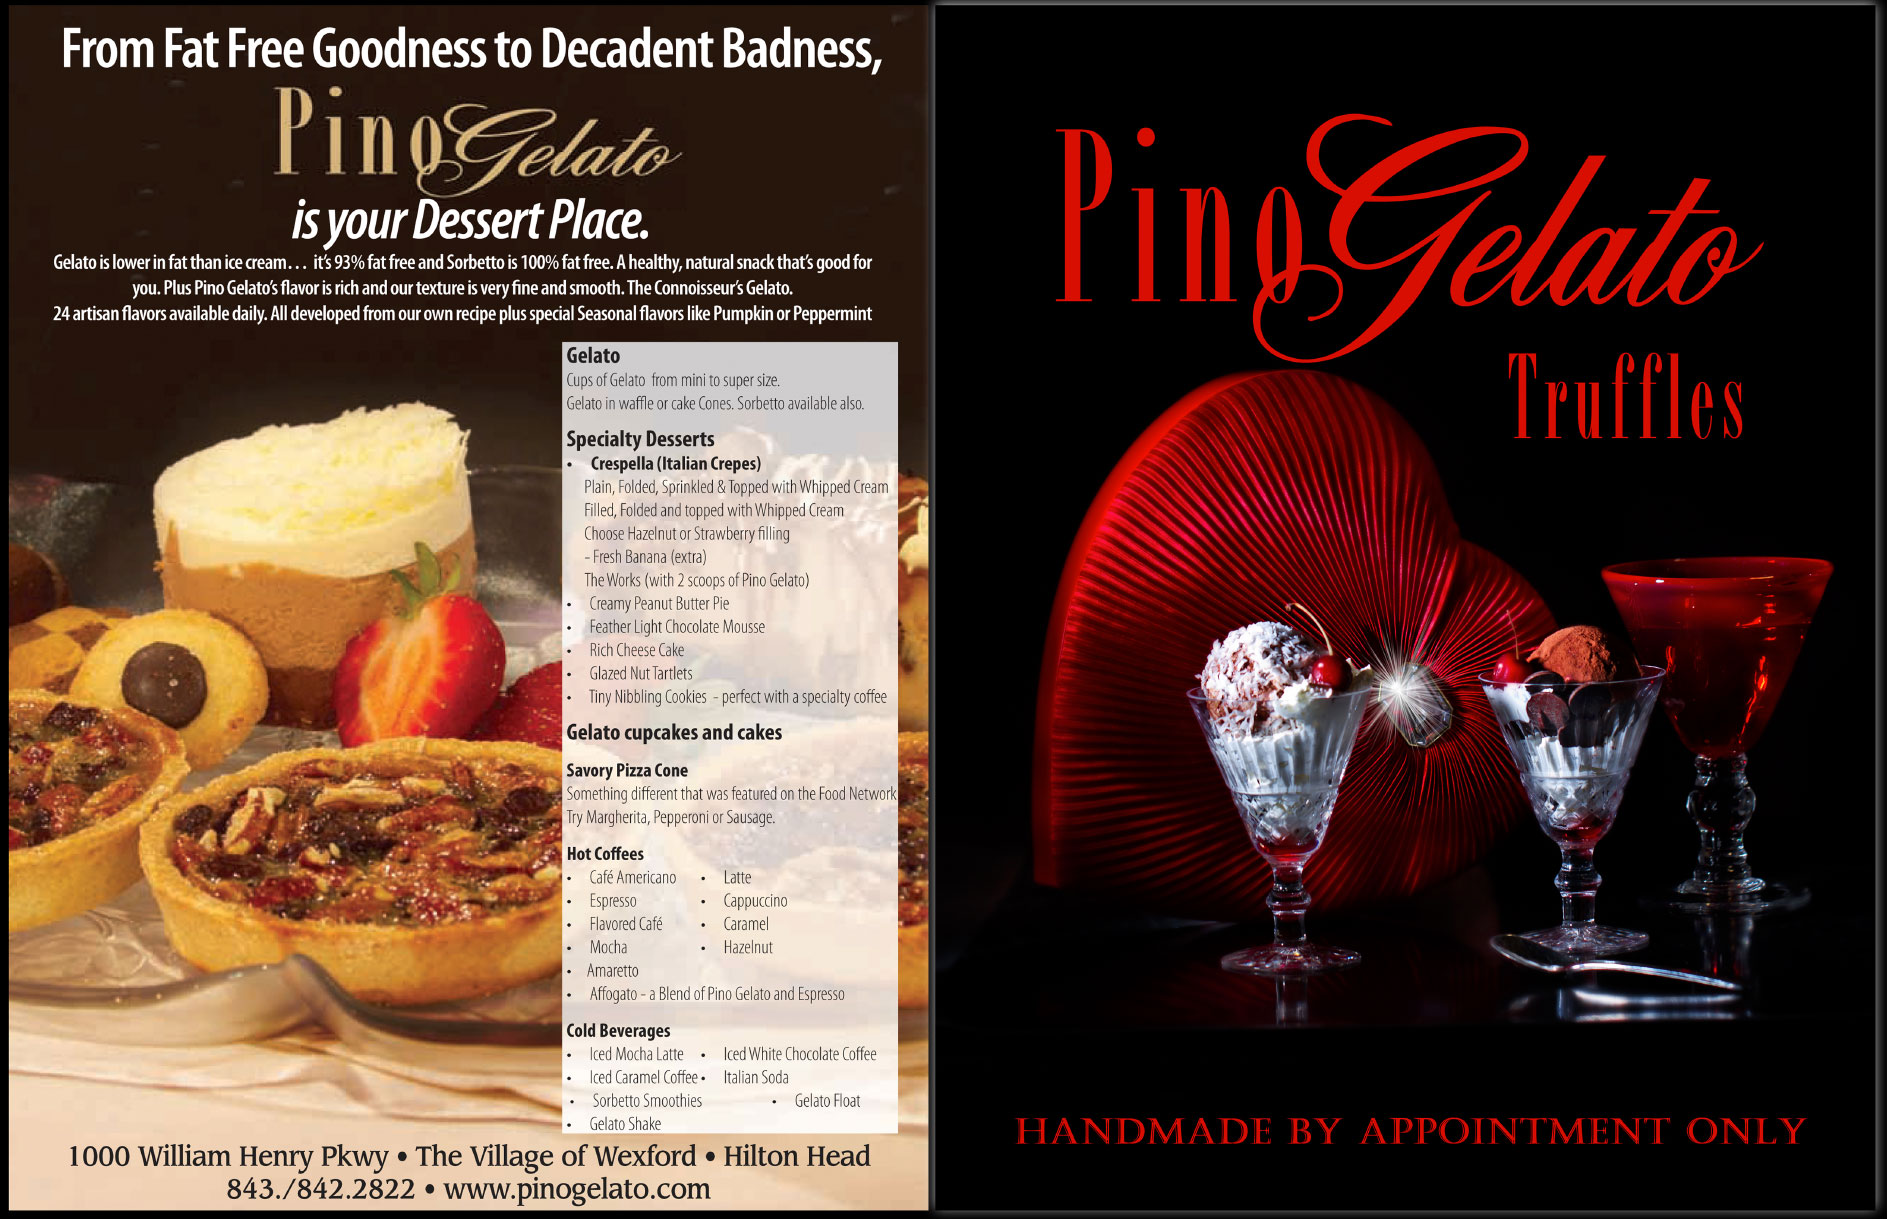 Series of Ads for Pino Gelato